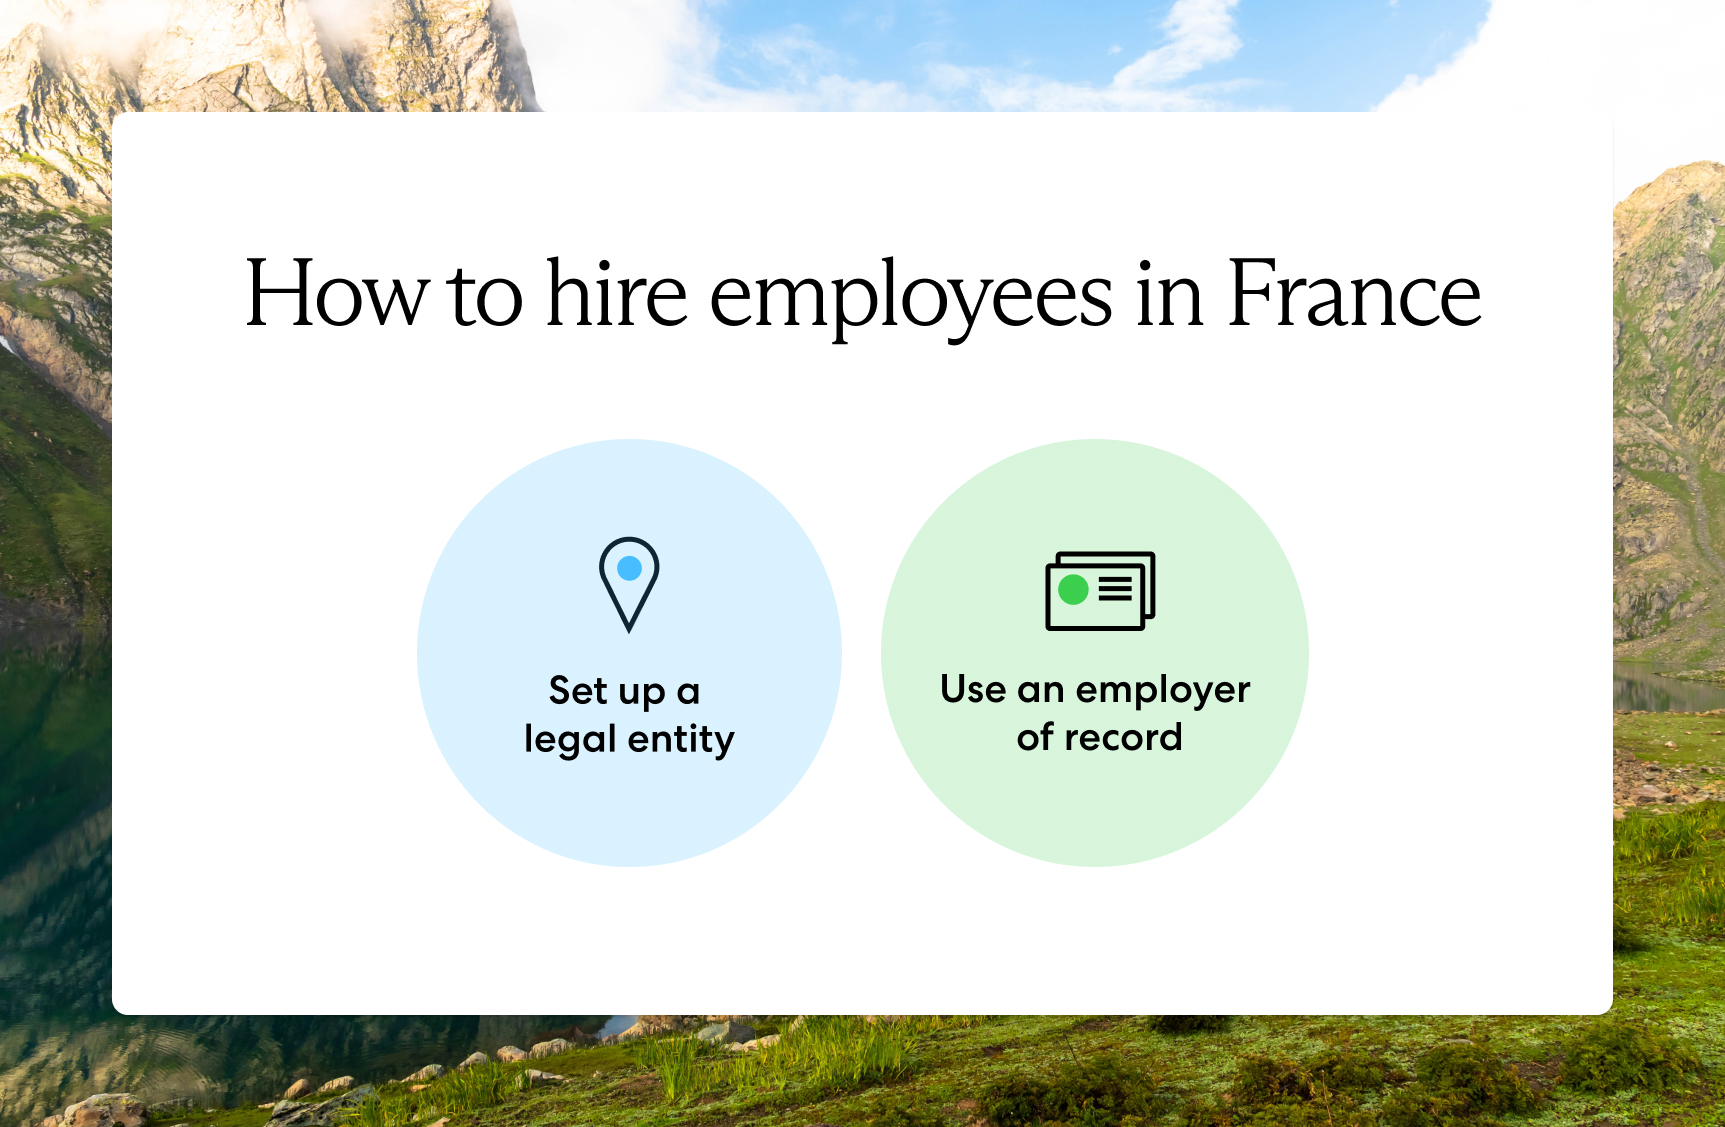 Global employers interested in hiring employees in France can set up a local entity, work with an EOR, or engage contractors.